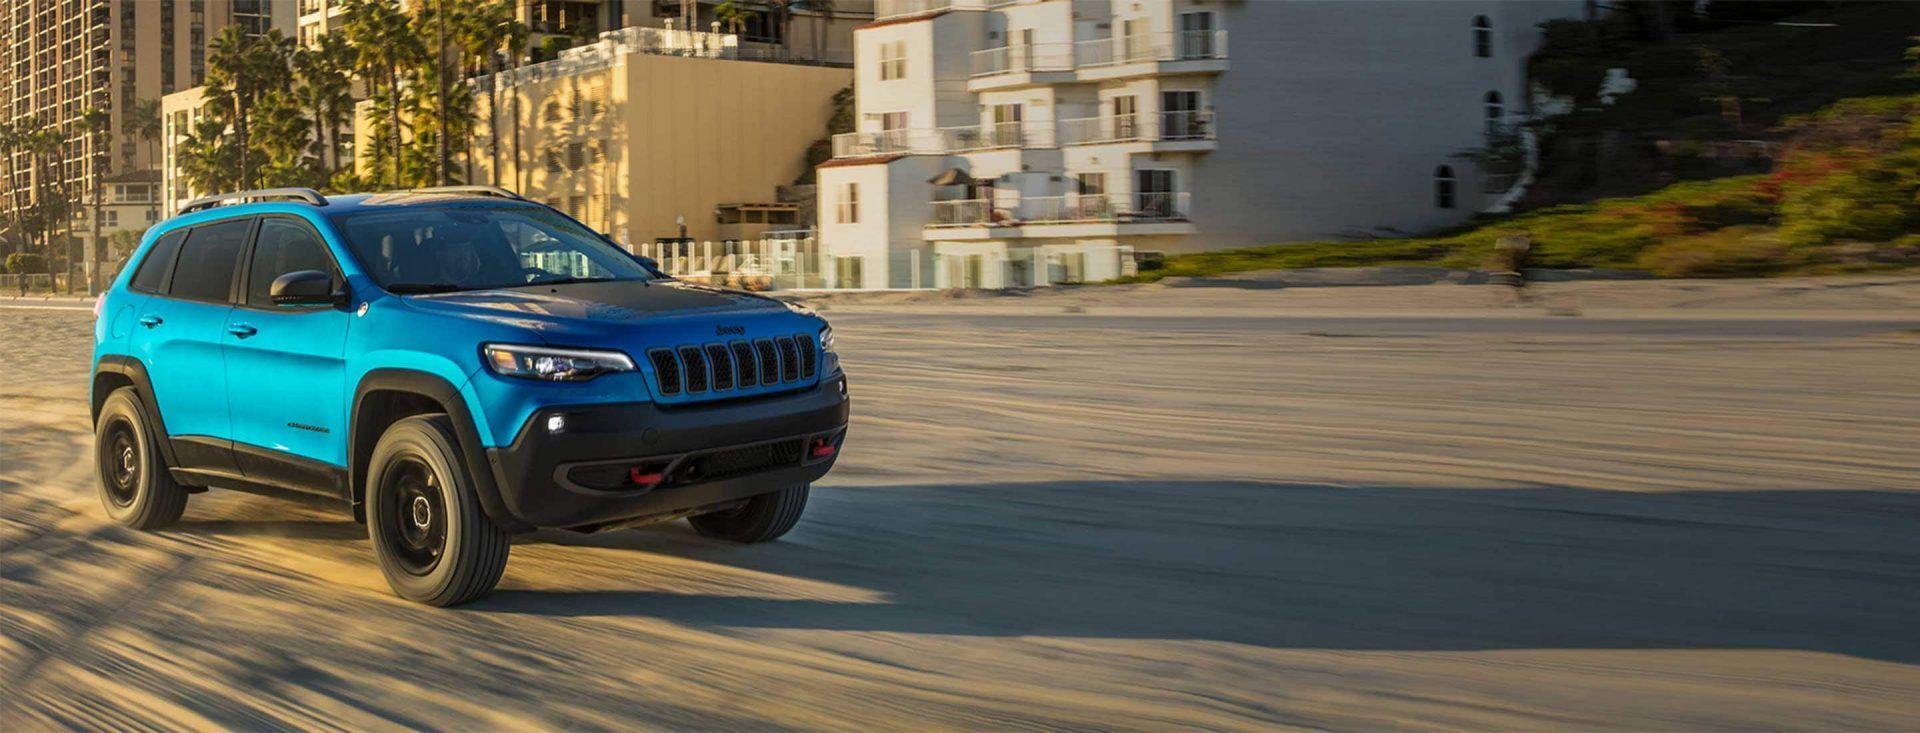 Jeep Cherokee Limited Logo - 2019 Jeep Cherokee - Discover New Adventures In Style